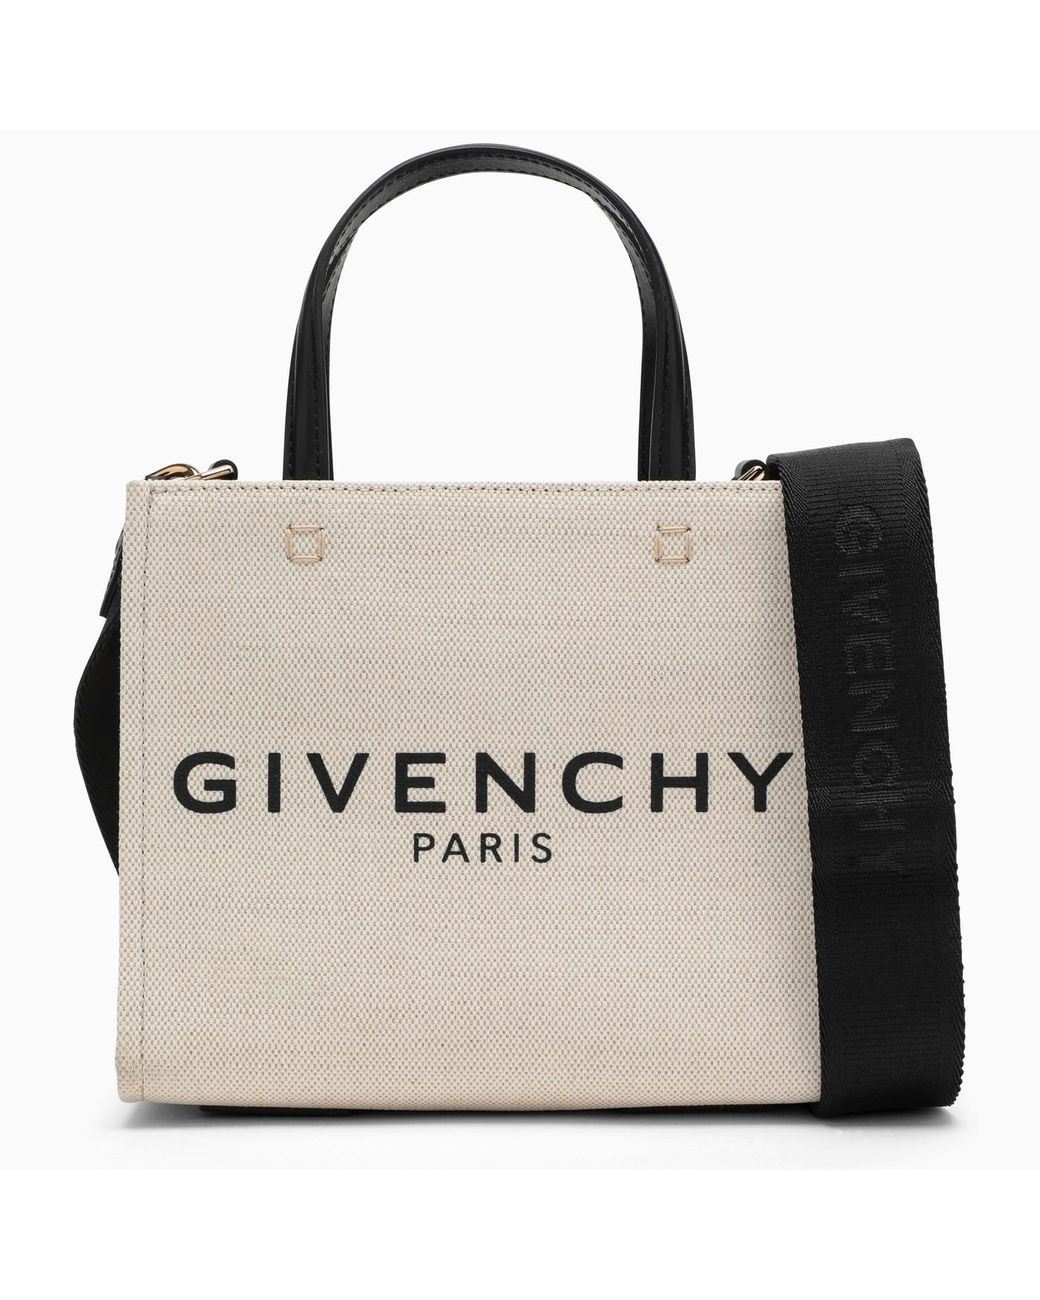 Givenchy G Mini Canvas Tote Bag in Natural | Lyst